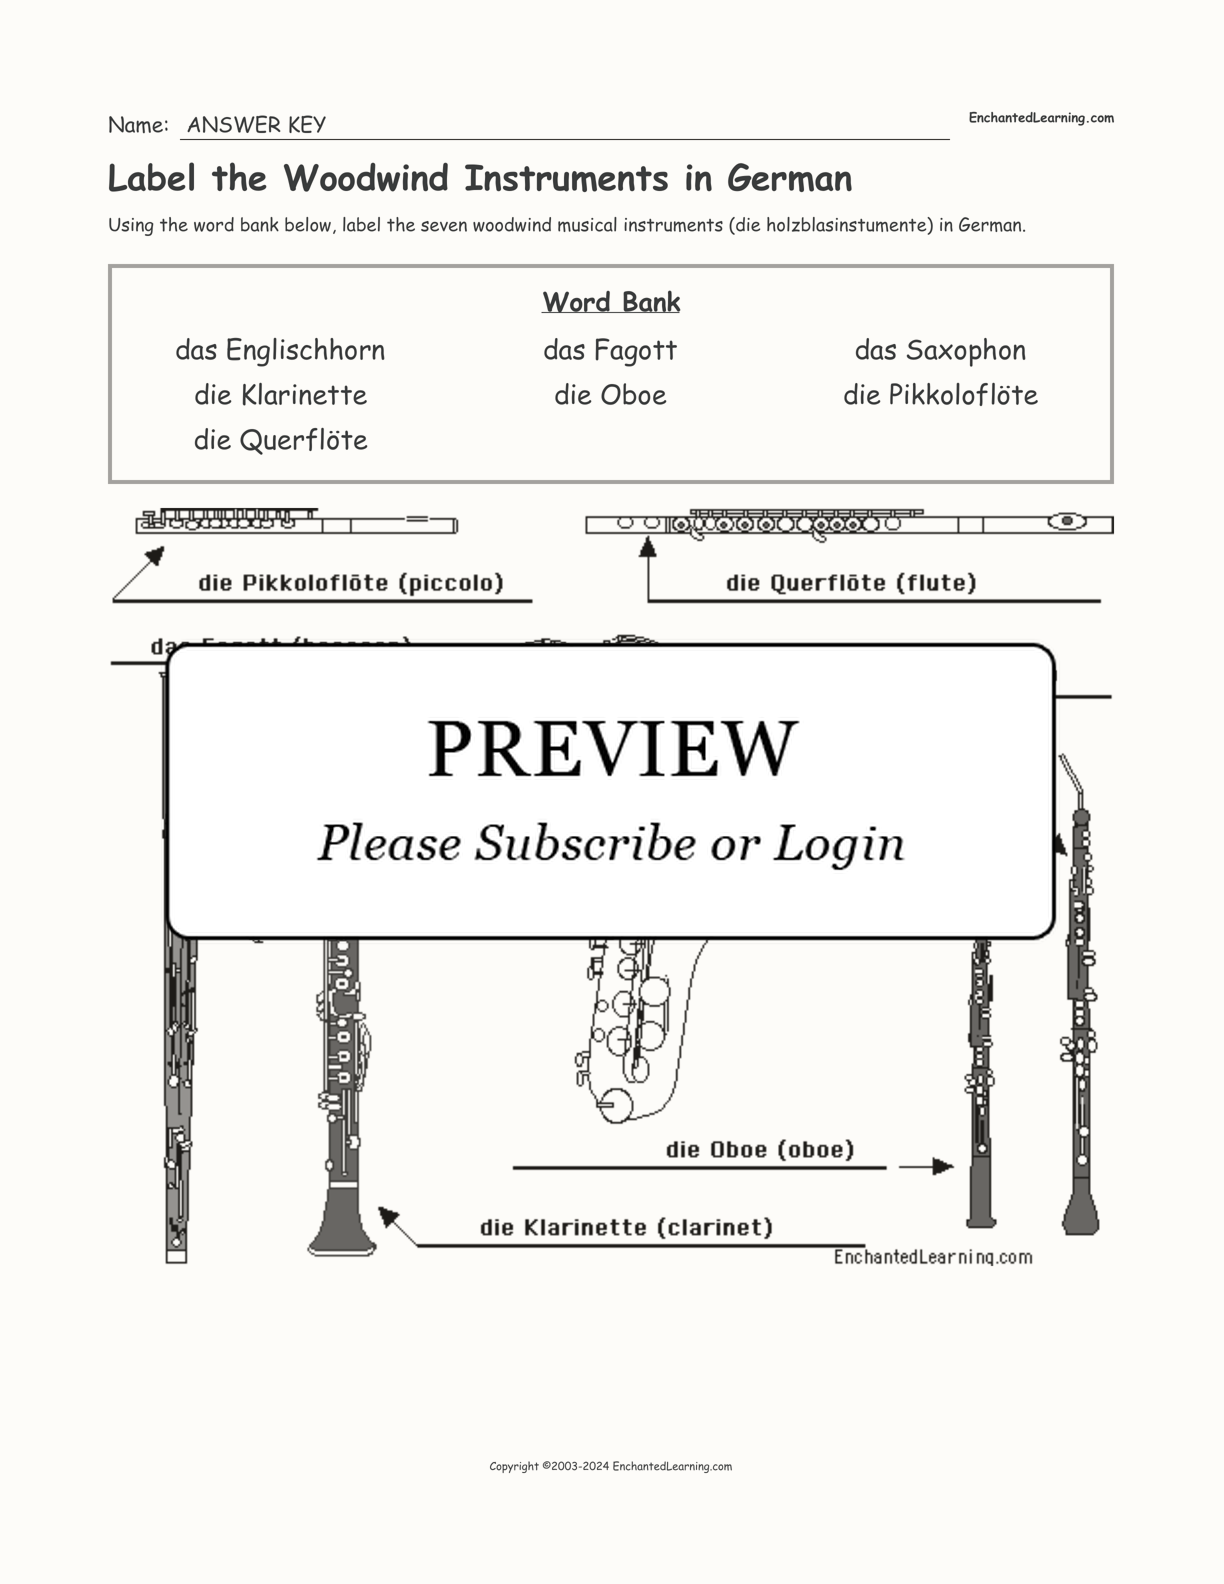 Label the Woodwind Instruments in German interactive worksheet page 2